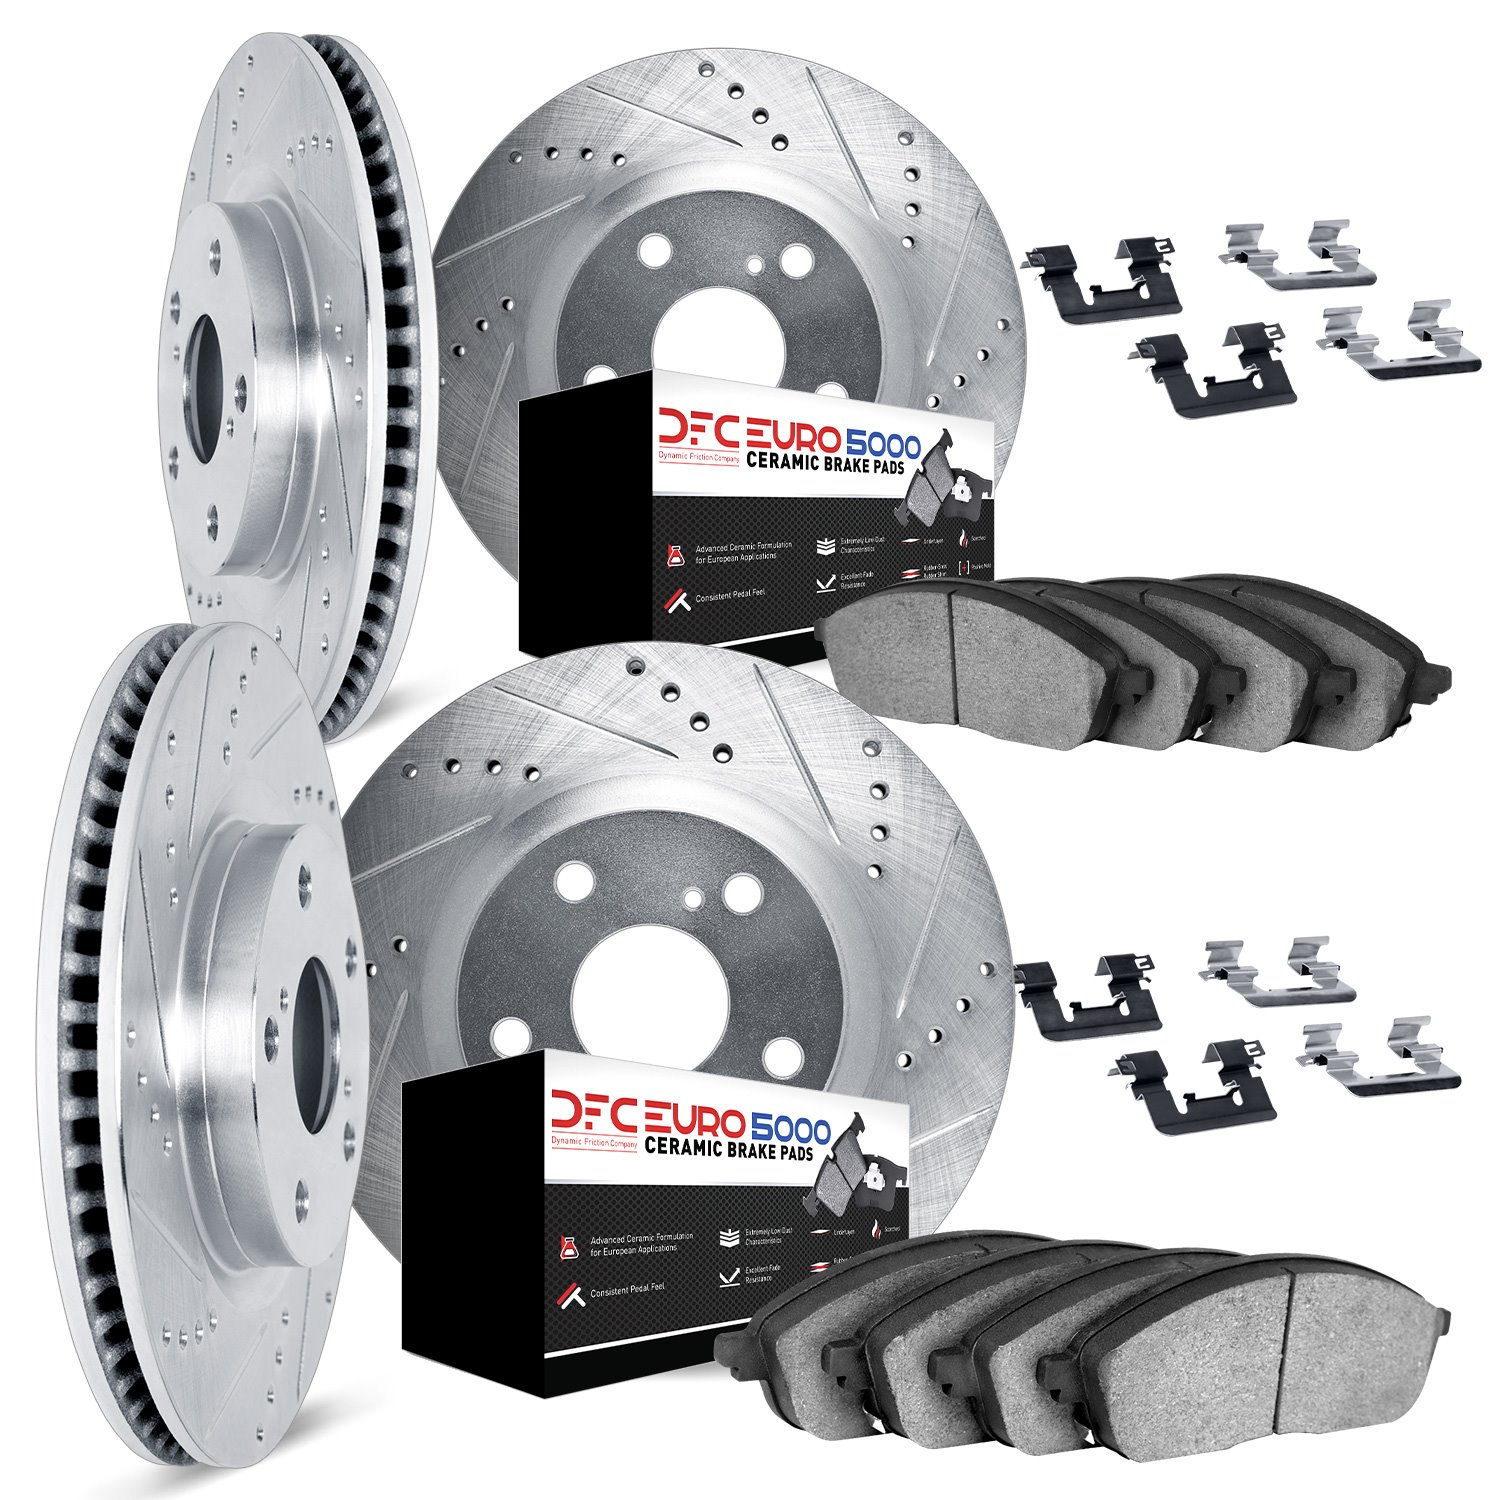 7614-31031 Drilled/Slotted Brake Rotors w/5000 Euro Ceramic Brake Pads Kit & Hardware [Silver], 2013-2018 BMW, Position: Front a